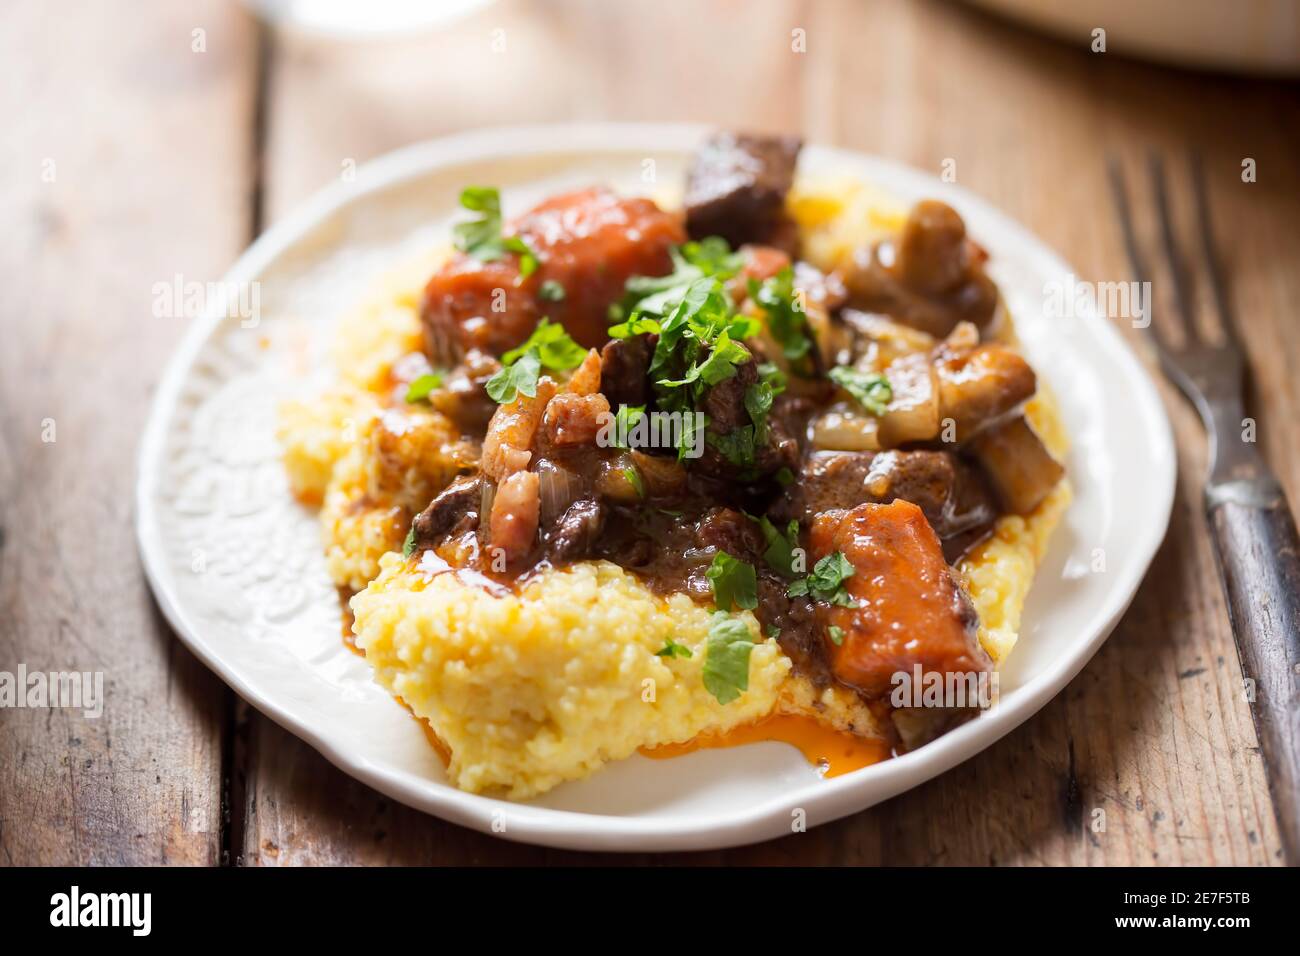 Boeuf bourguignon with carrots, mushrooms, topped with parsley served with polenta Stock Photo